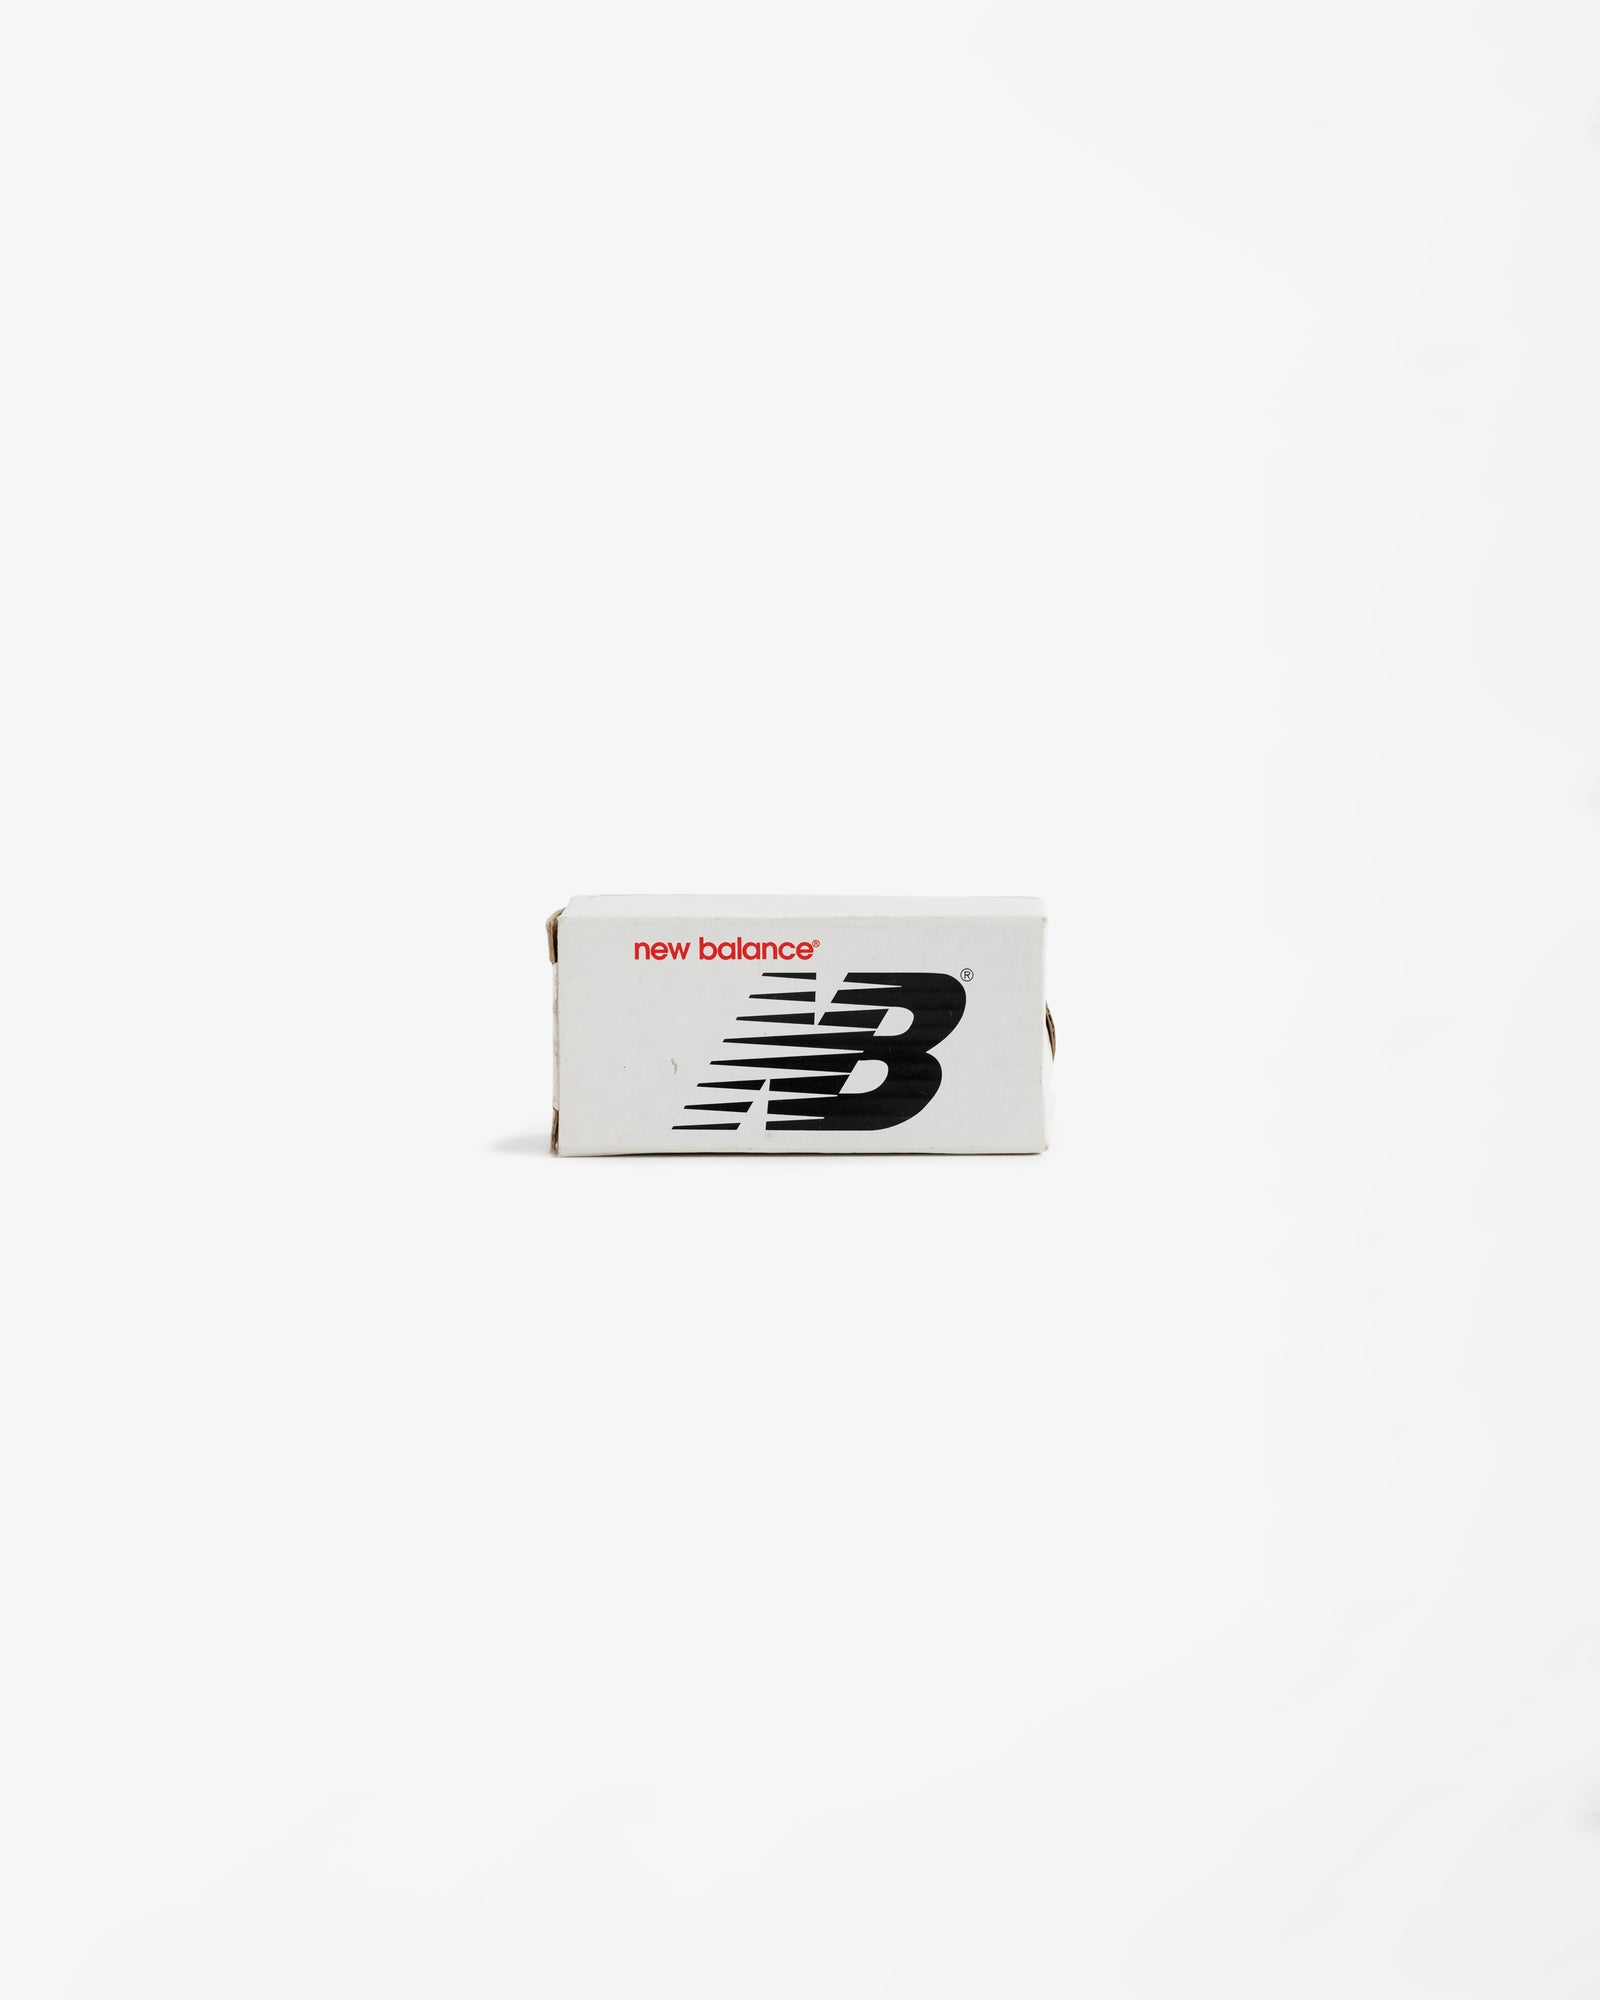 NB Sneaker Candle